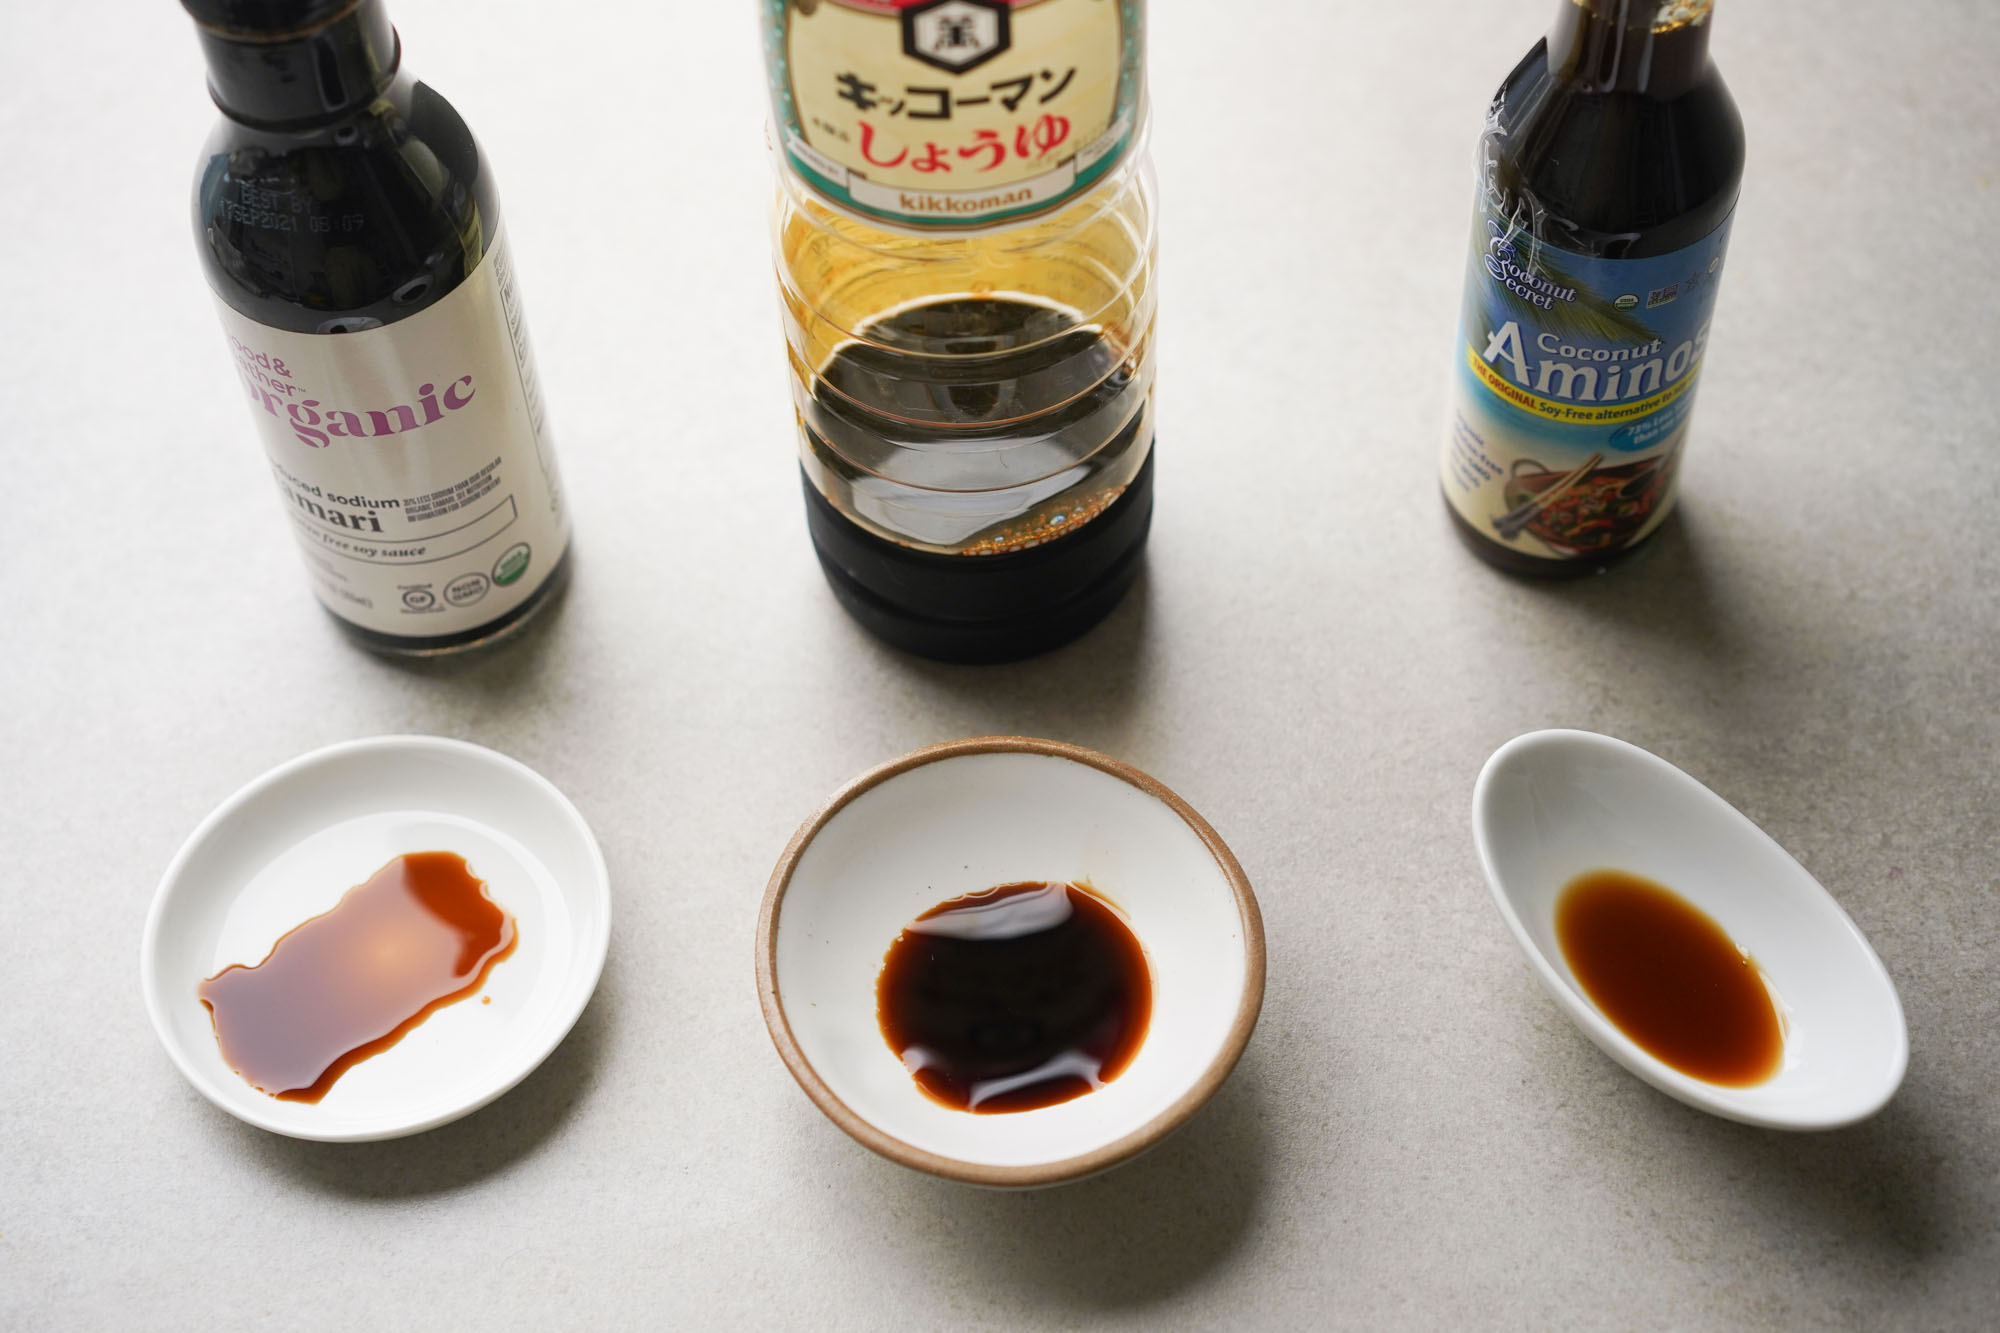 What's the Difference Between Tamari vs Soy Sauce?